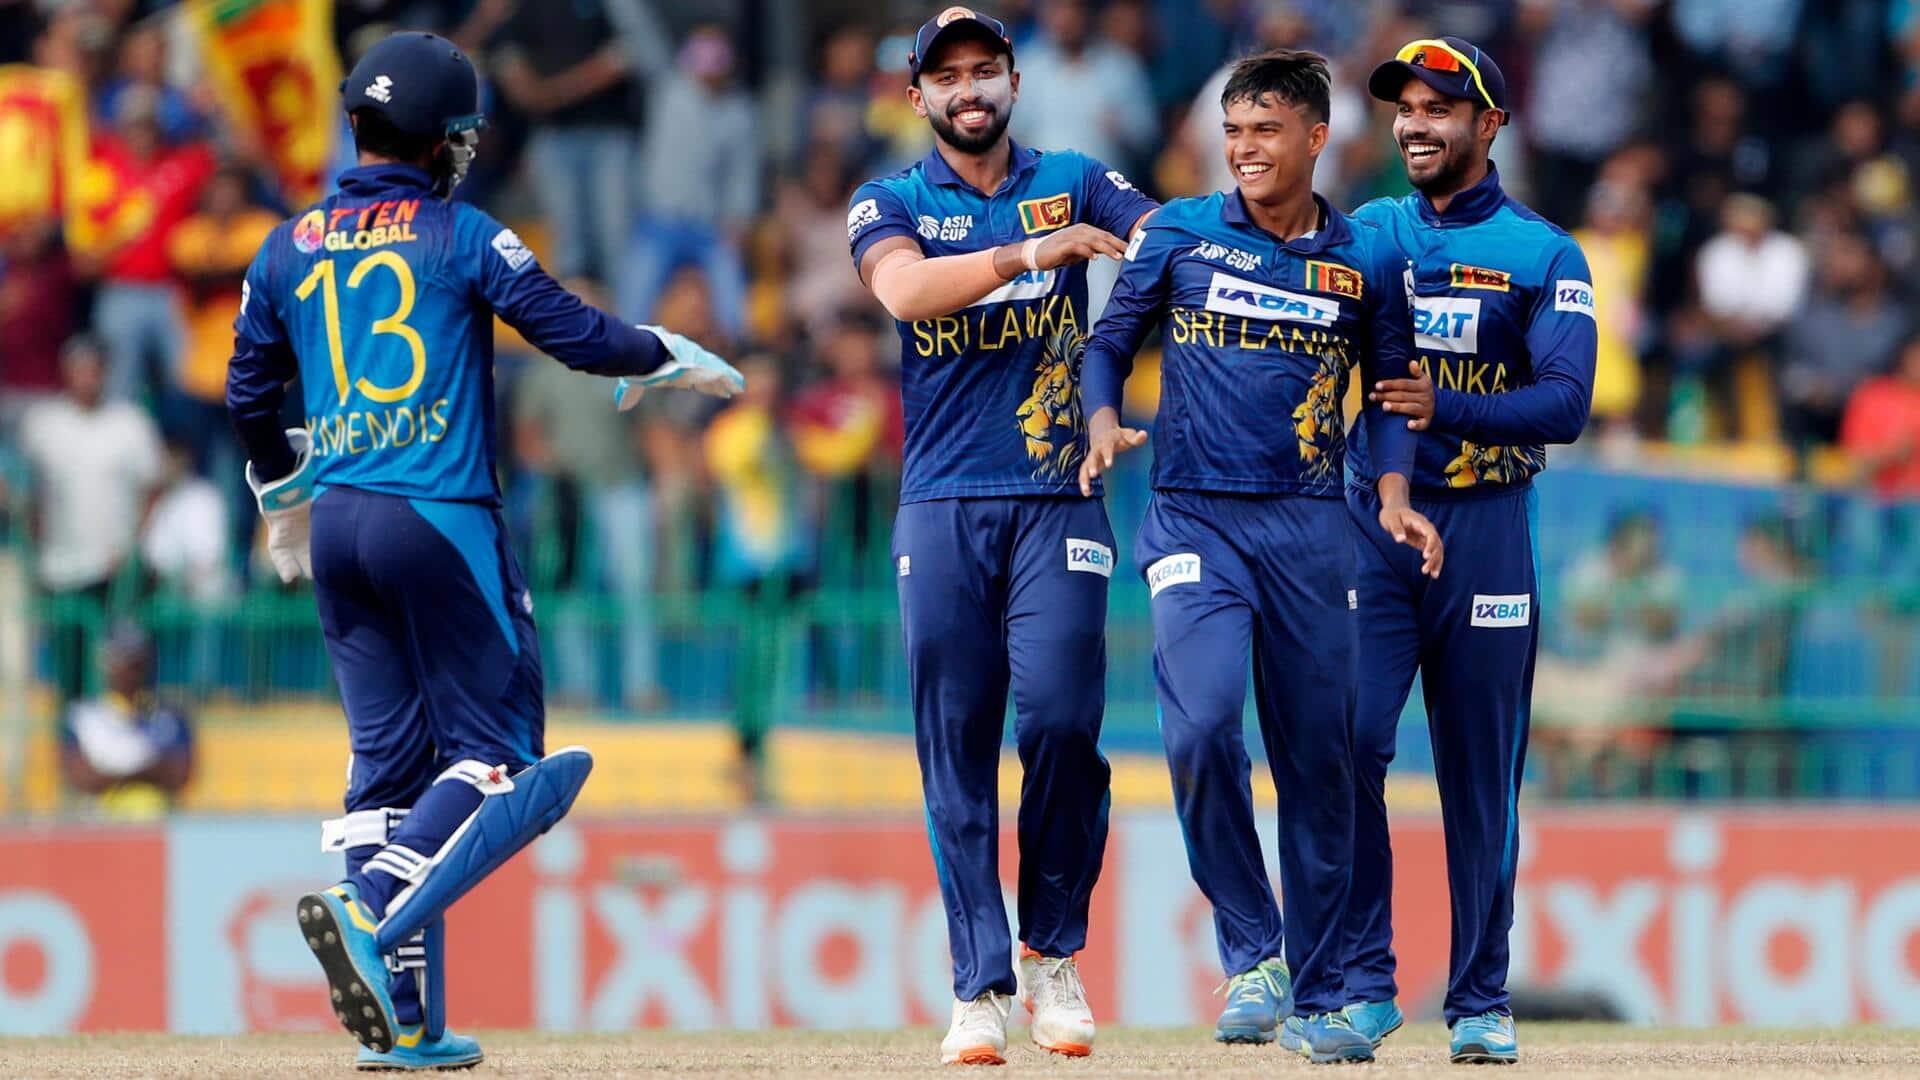 Asia Cup: Sri Lanka's hero Dunith Wellalage scripts these records